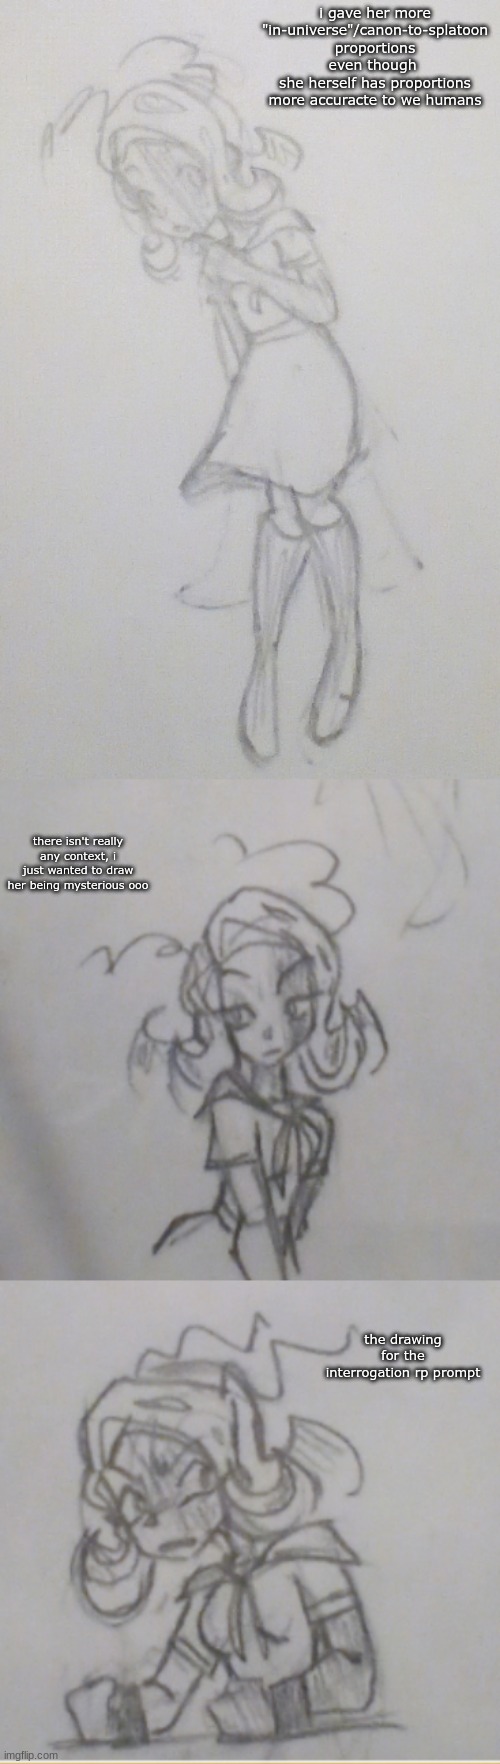 i gave her more "in-universe"/canon-to-splatoon proportions even though 
she herself has proportions more accuracte to we humans; there isn't really any context, i just wanted to draw her being mysterious ooo; the drawing for the interrogation rp prompt | made w/ Imgflip meme maker